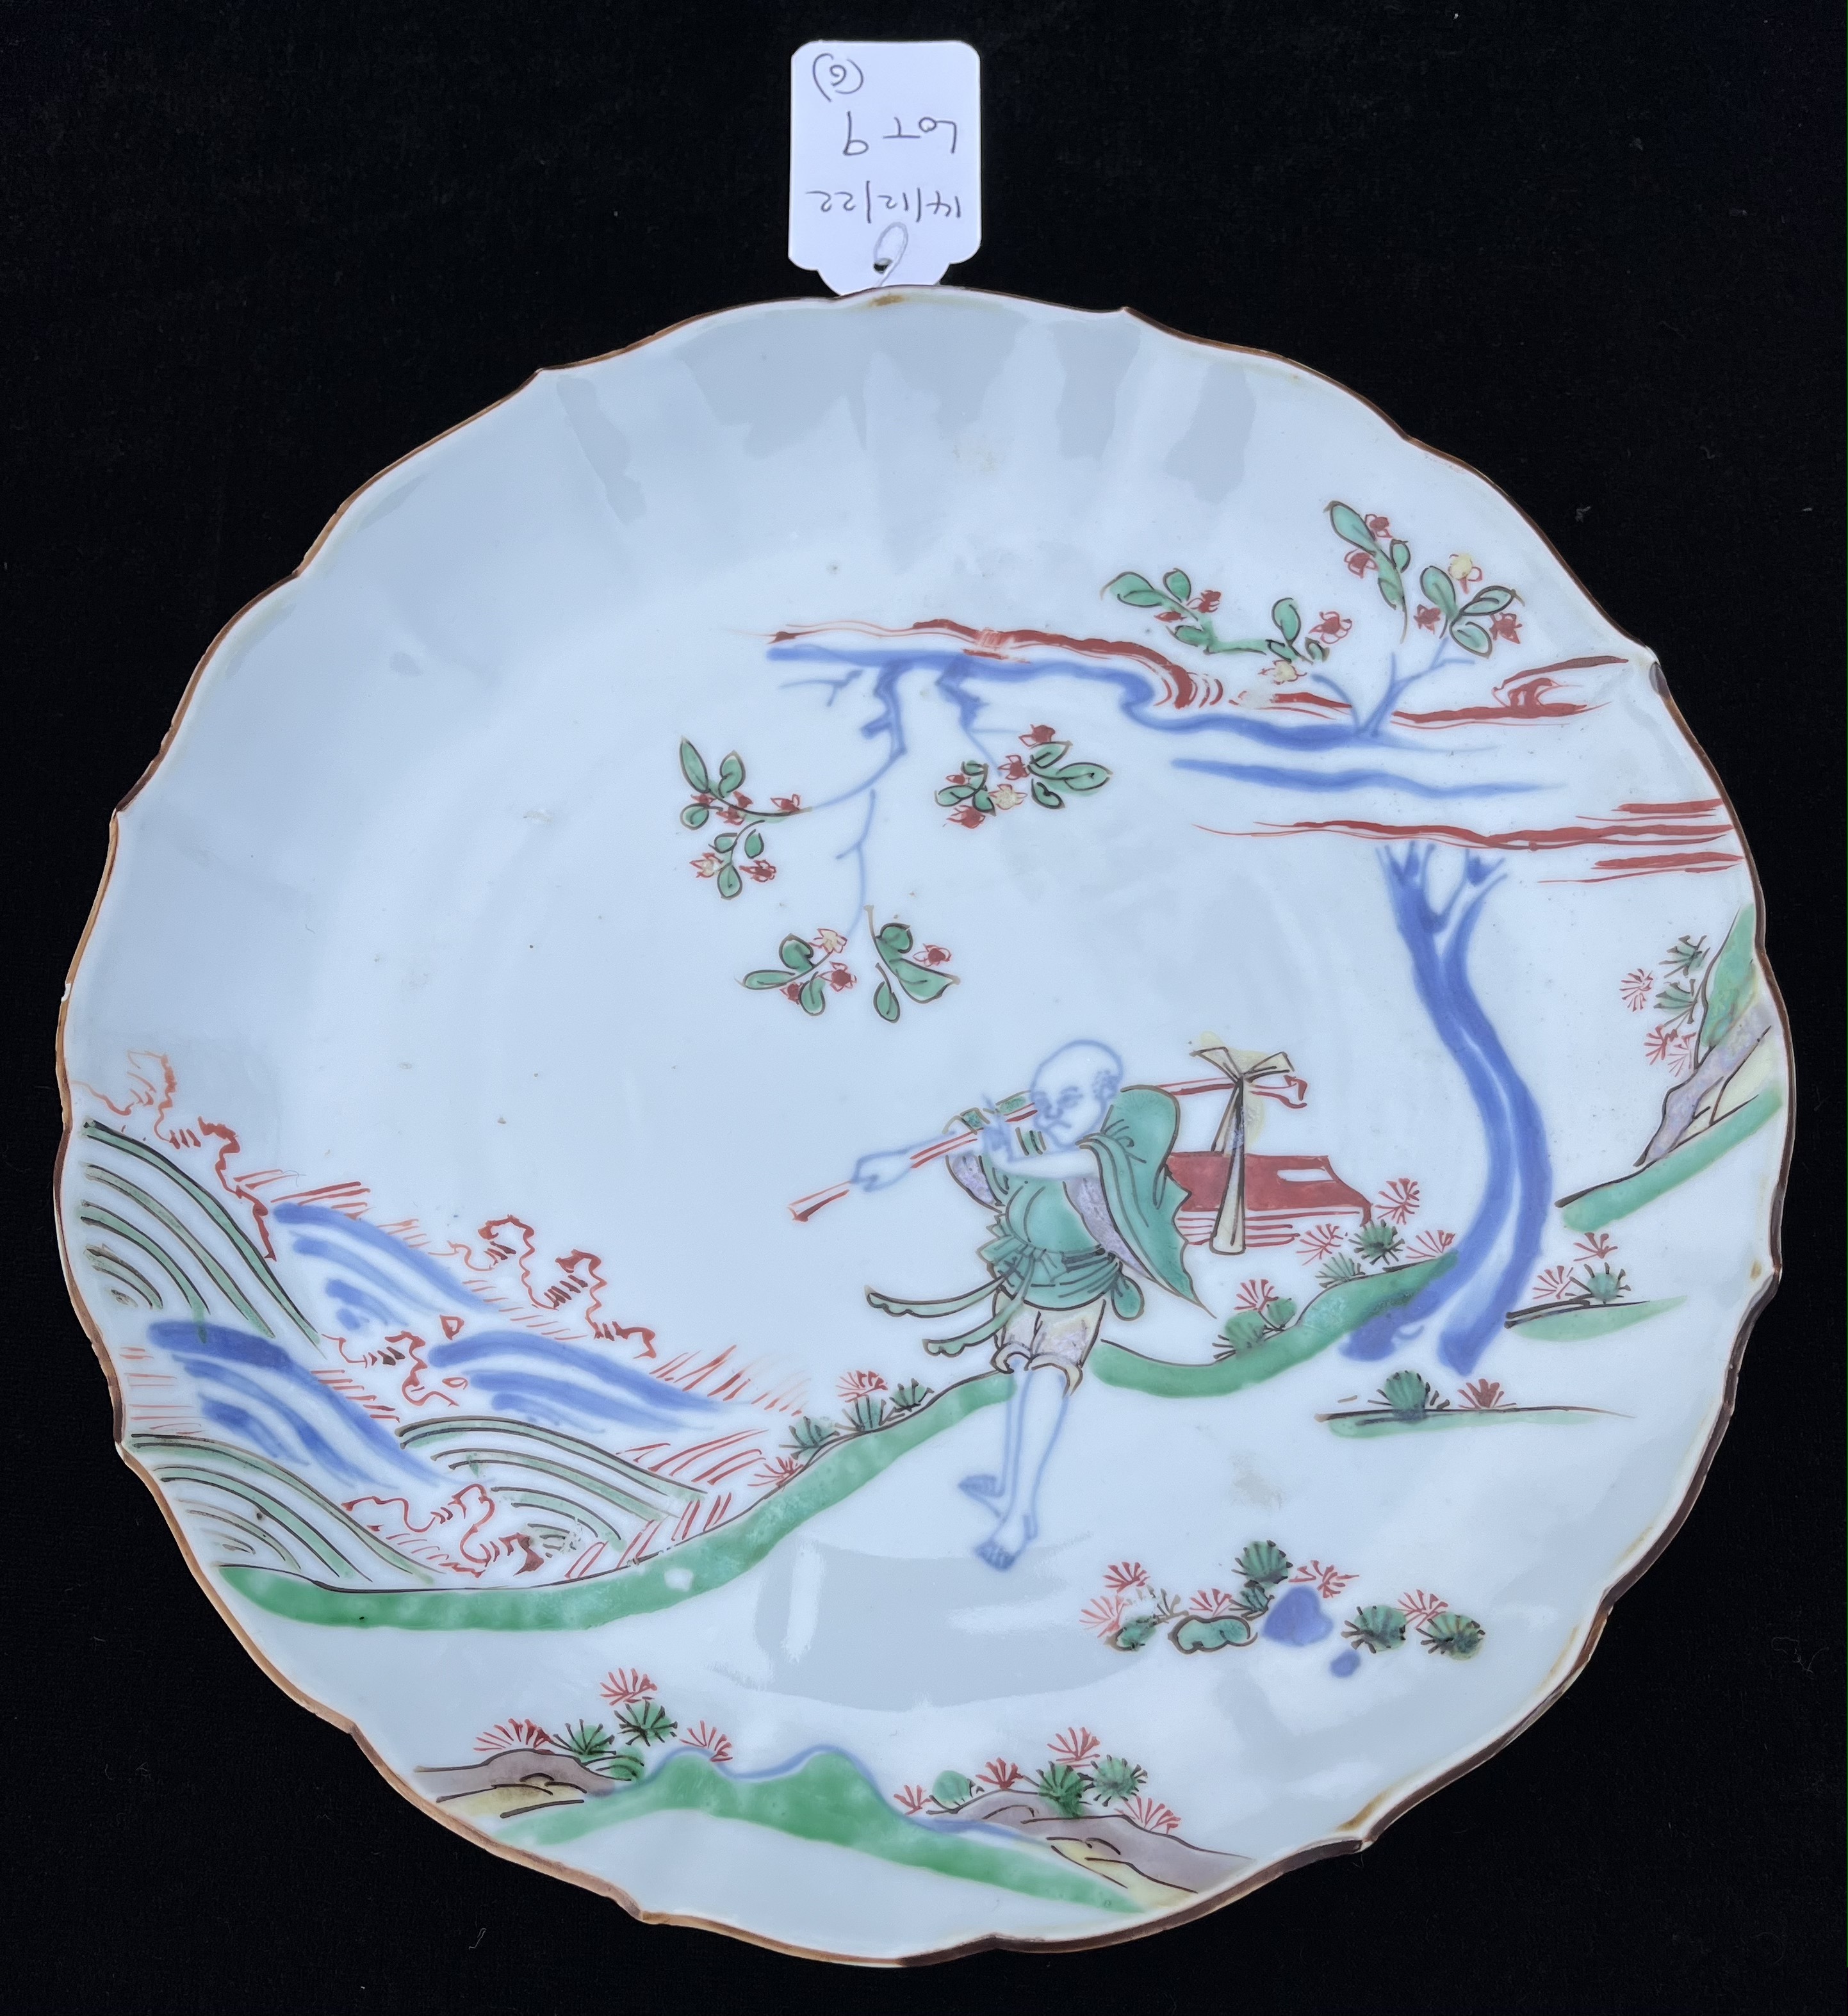 A SET OF FIVE CHINESE UNDERGLAZE-BLUE AND ENAMELLED SERVING DISHES, CHONGZHEN PERIOD, 1628 - 1644 - Image 6 of 8